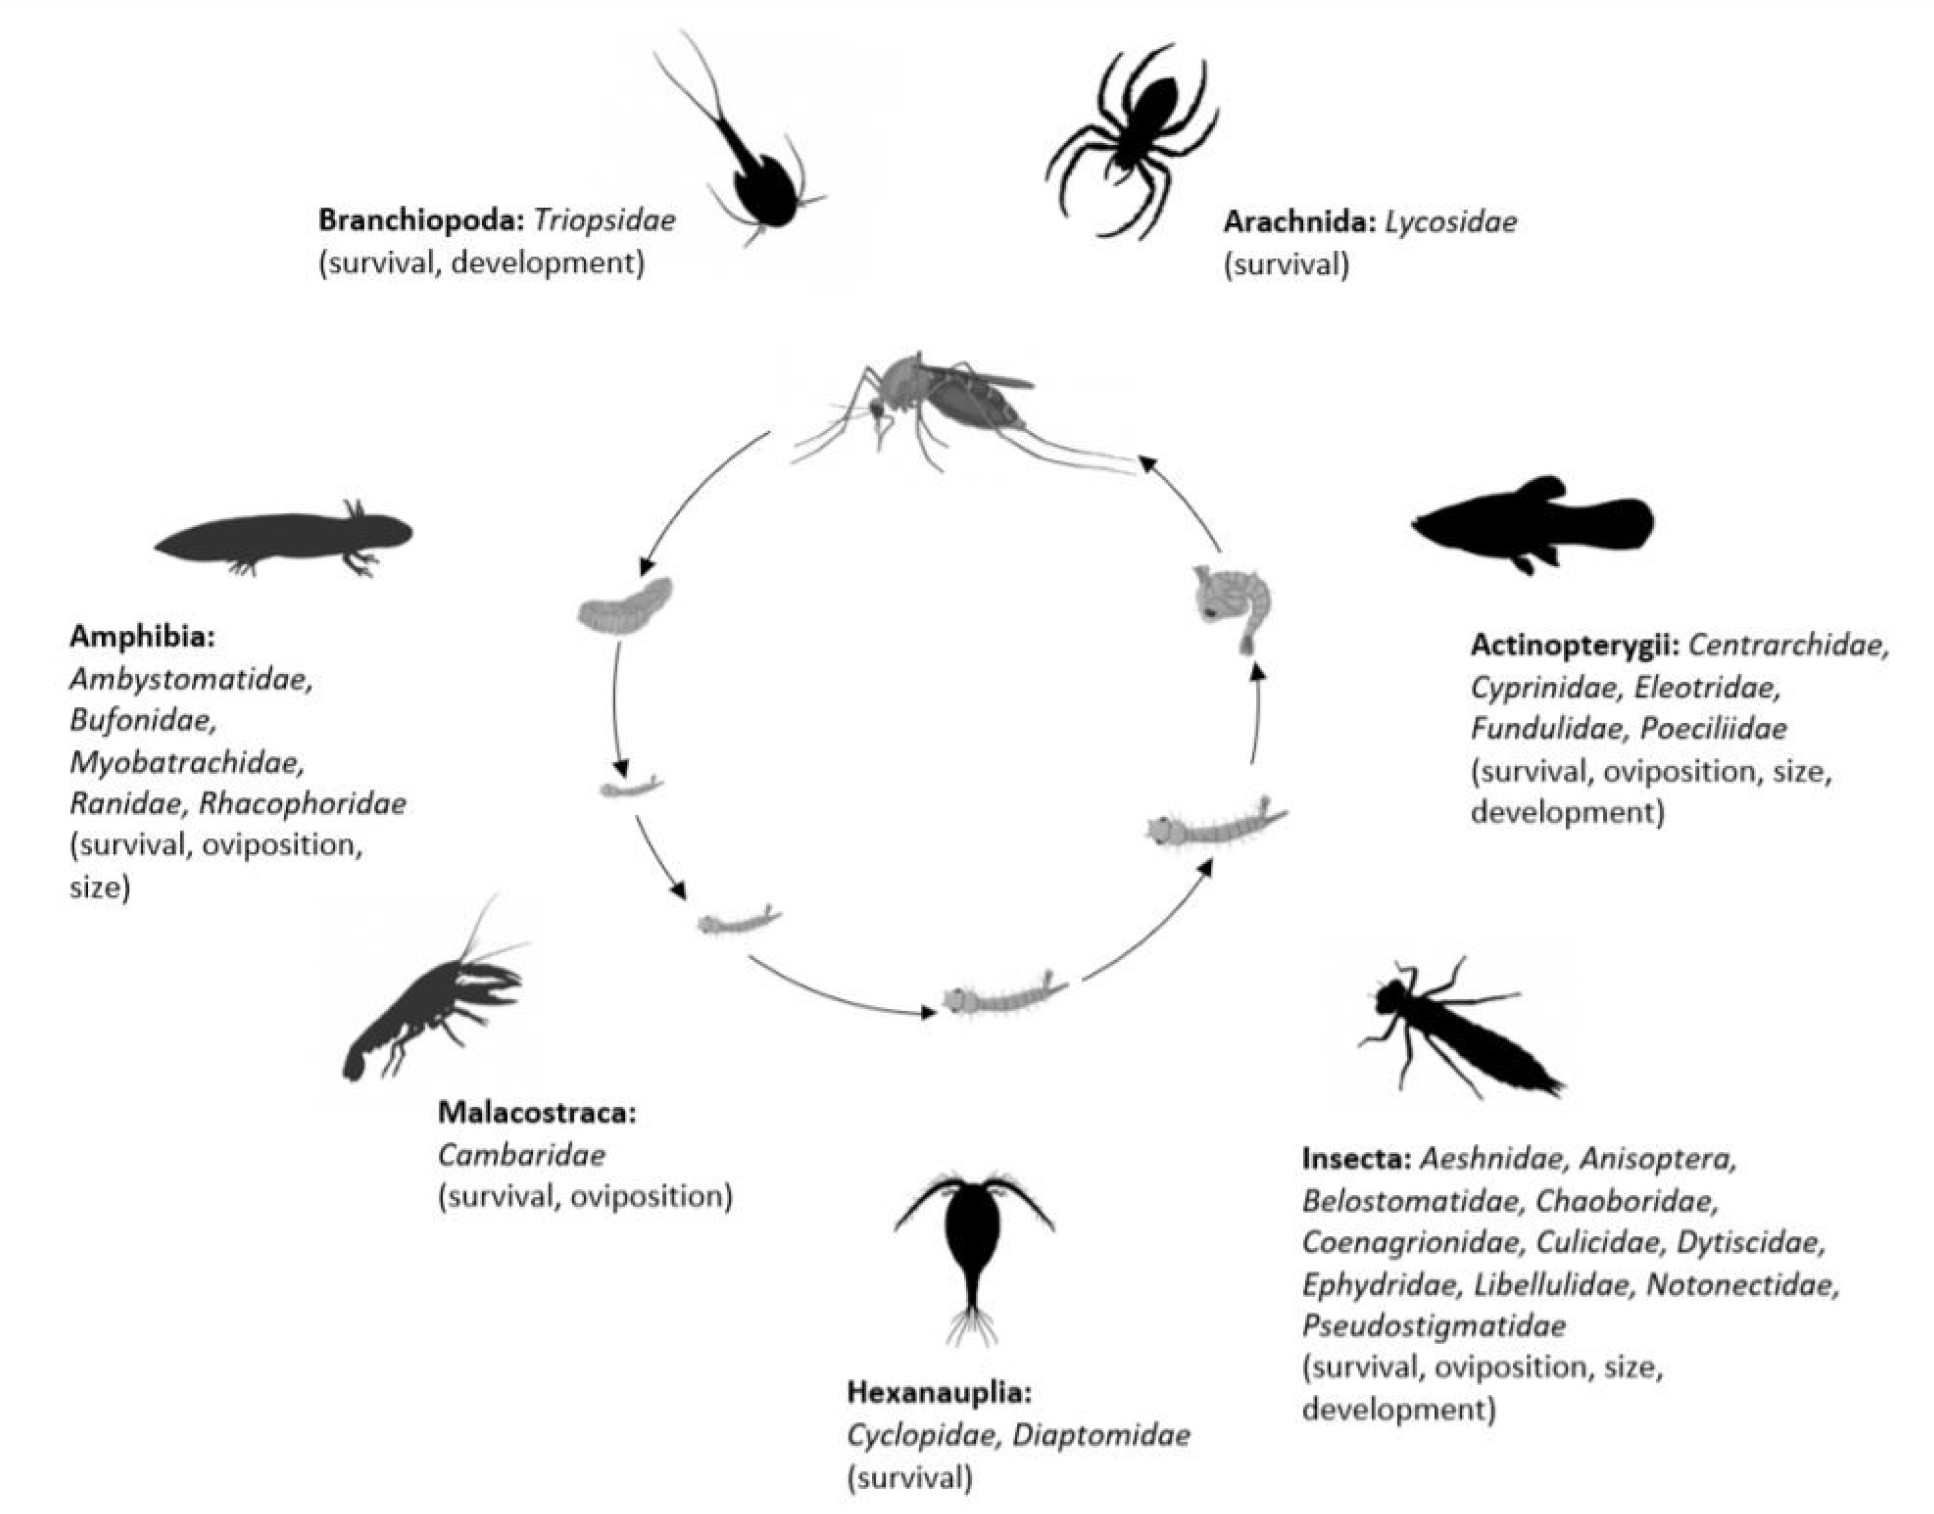 Illustration of mosquito life stages surrounded by other animals